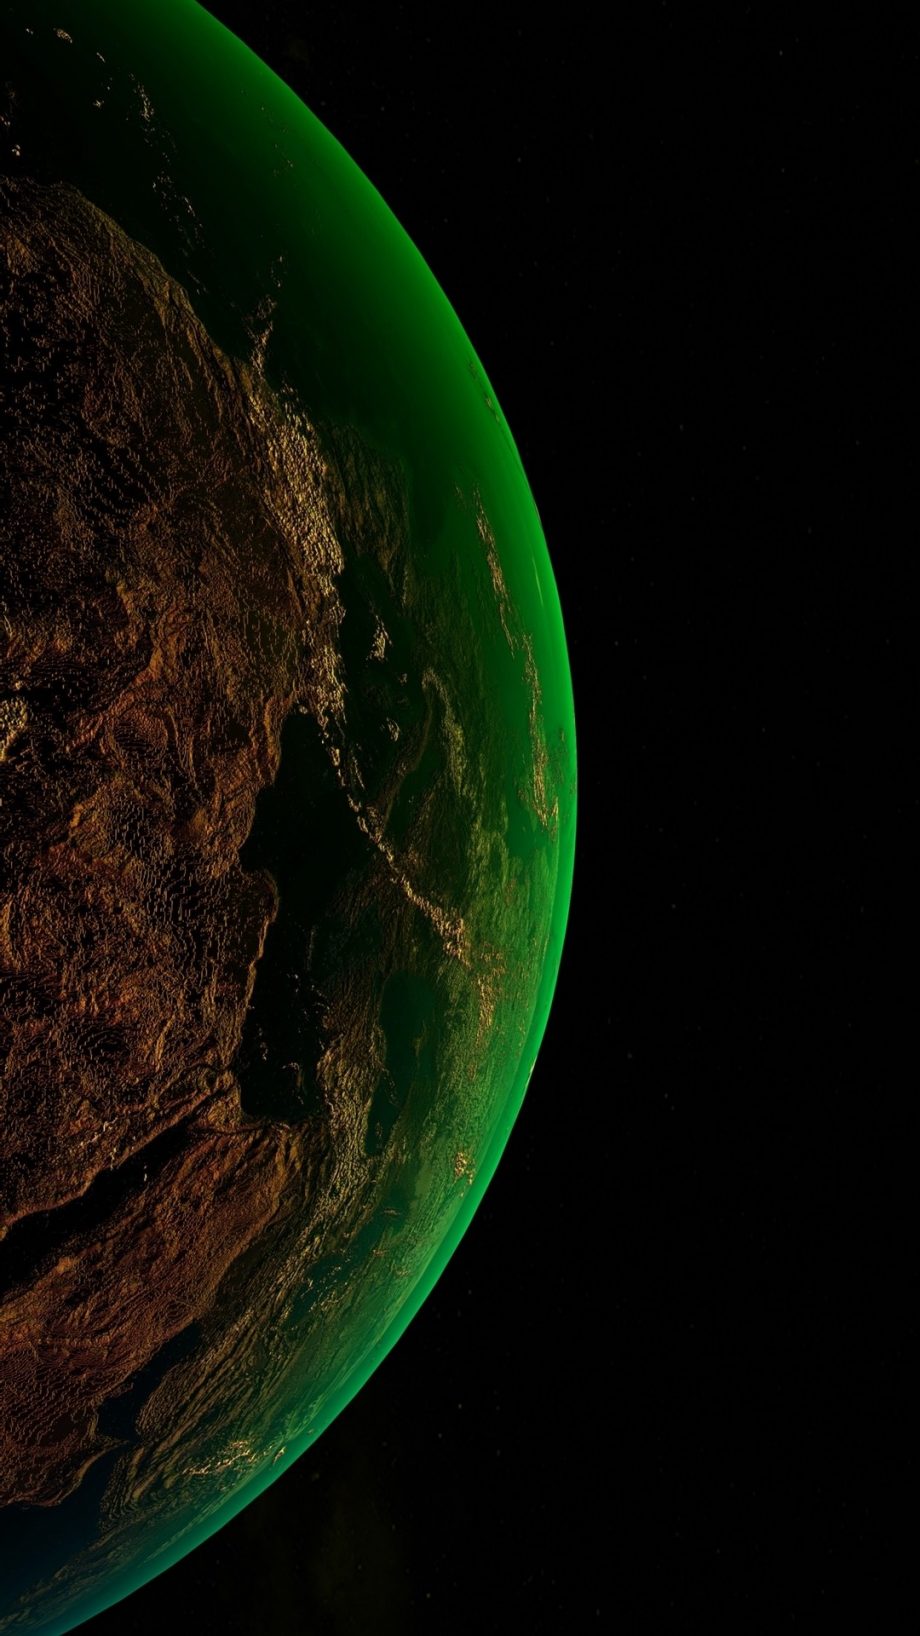 20 Planet iPhone Wallpapers - Wallpaperboat